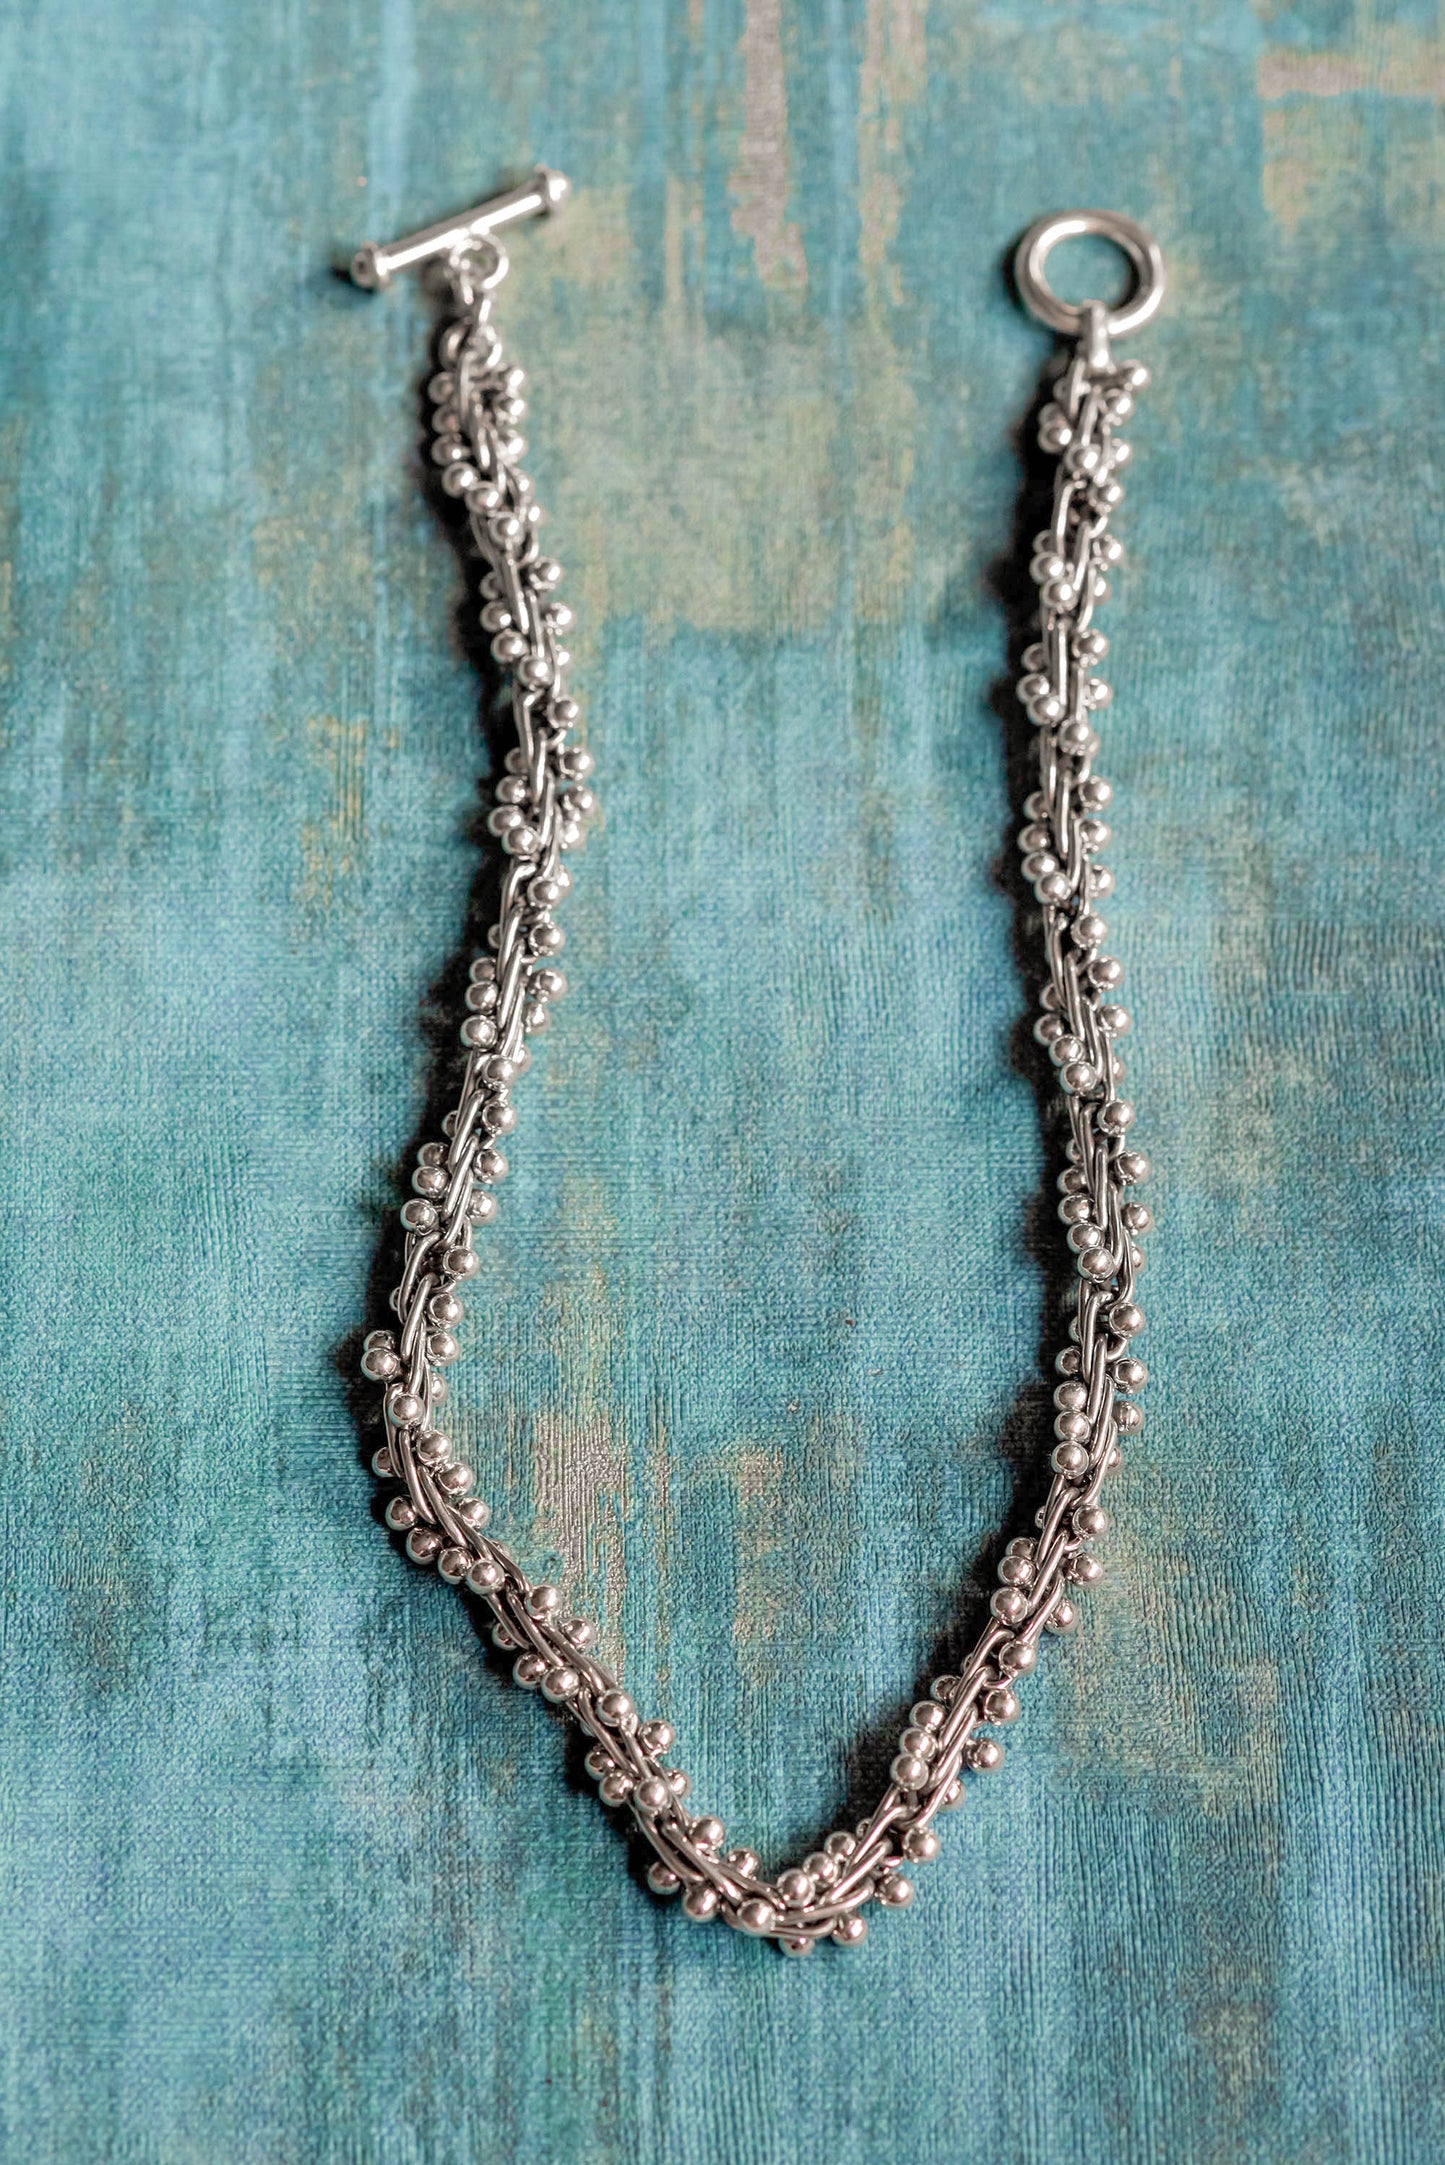 Solid Silver Spratling Style Peppercorn Necklace